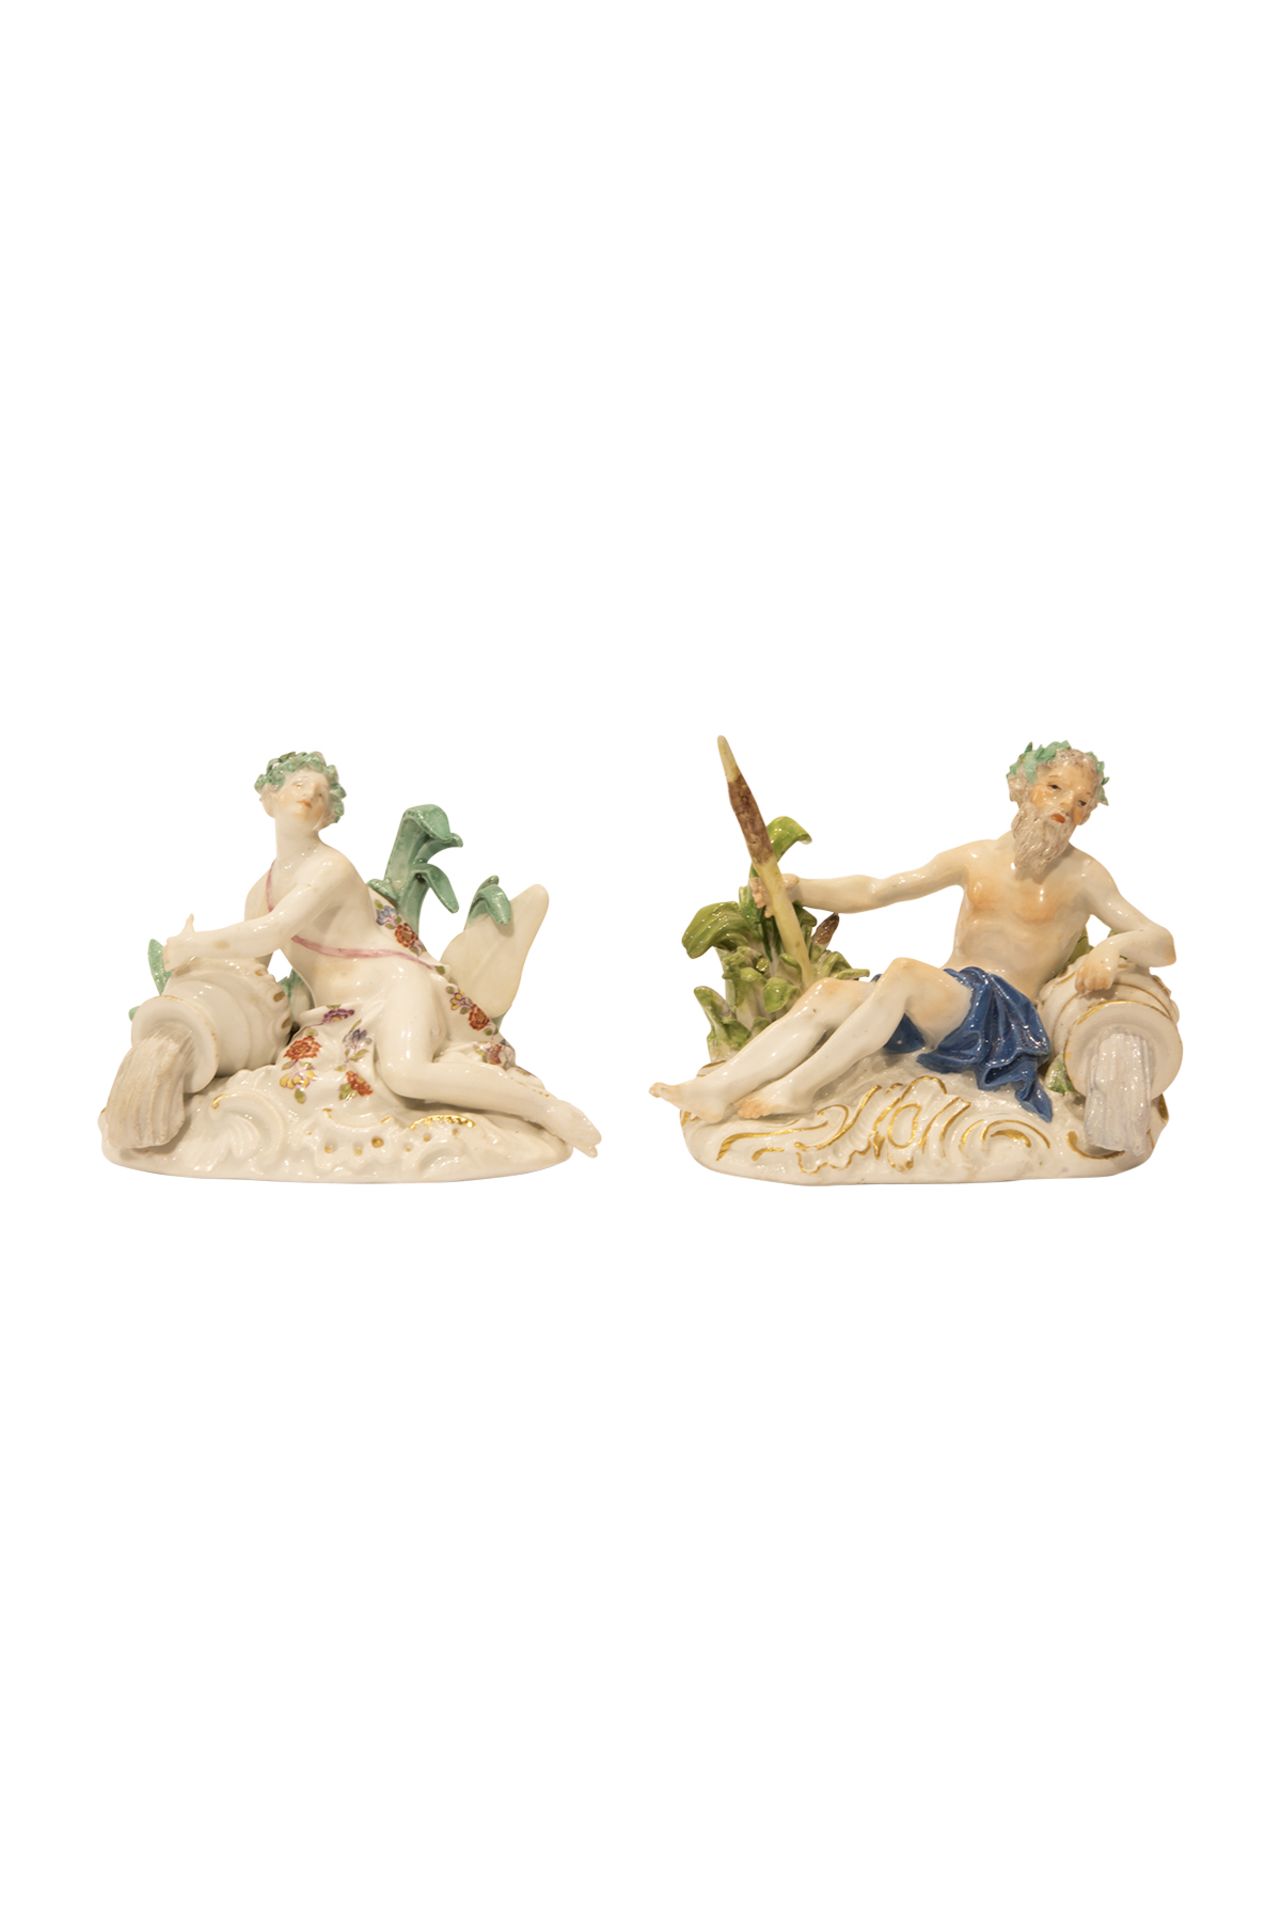 Two small figures river god and river goddess, Meissen 1750